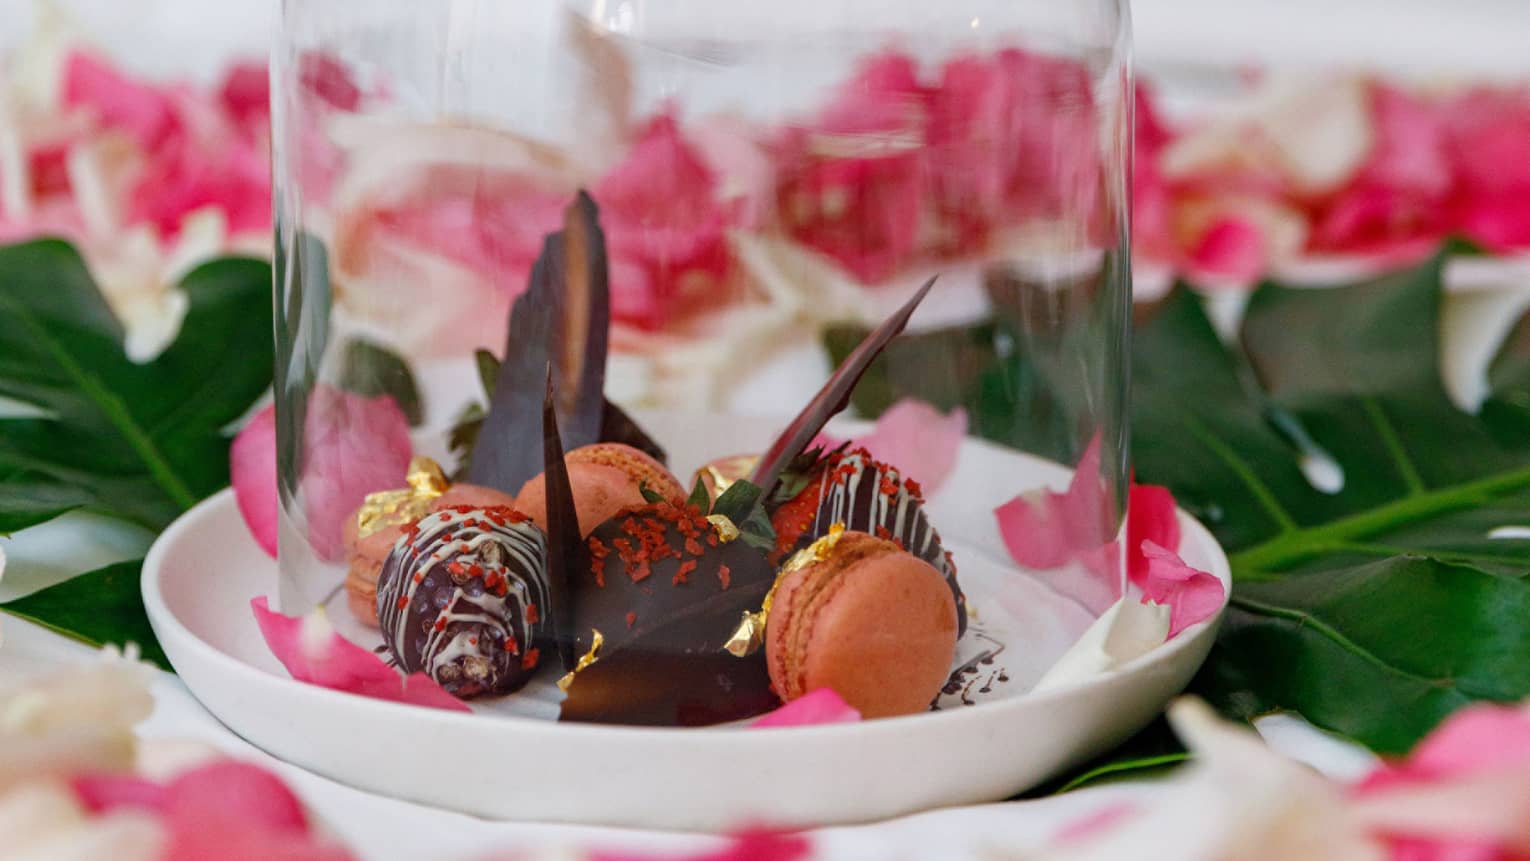 White saucer with macarons and truffles under glass dome, surrounded by pink rose petals